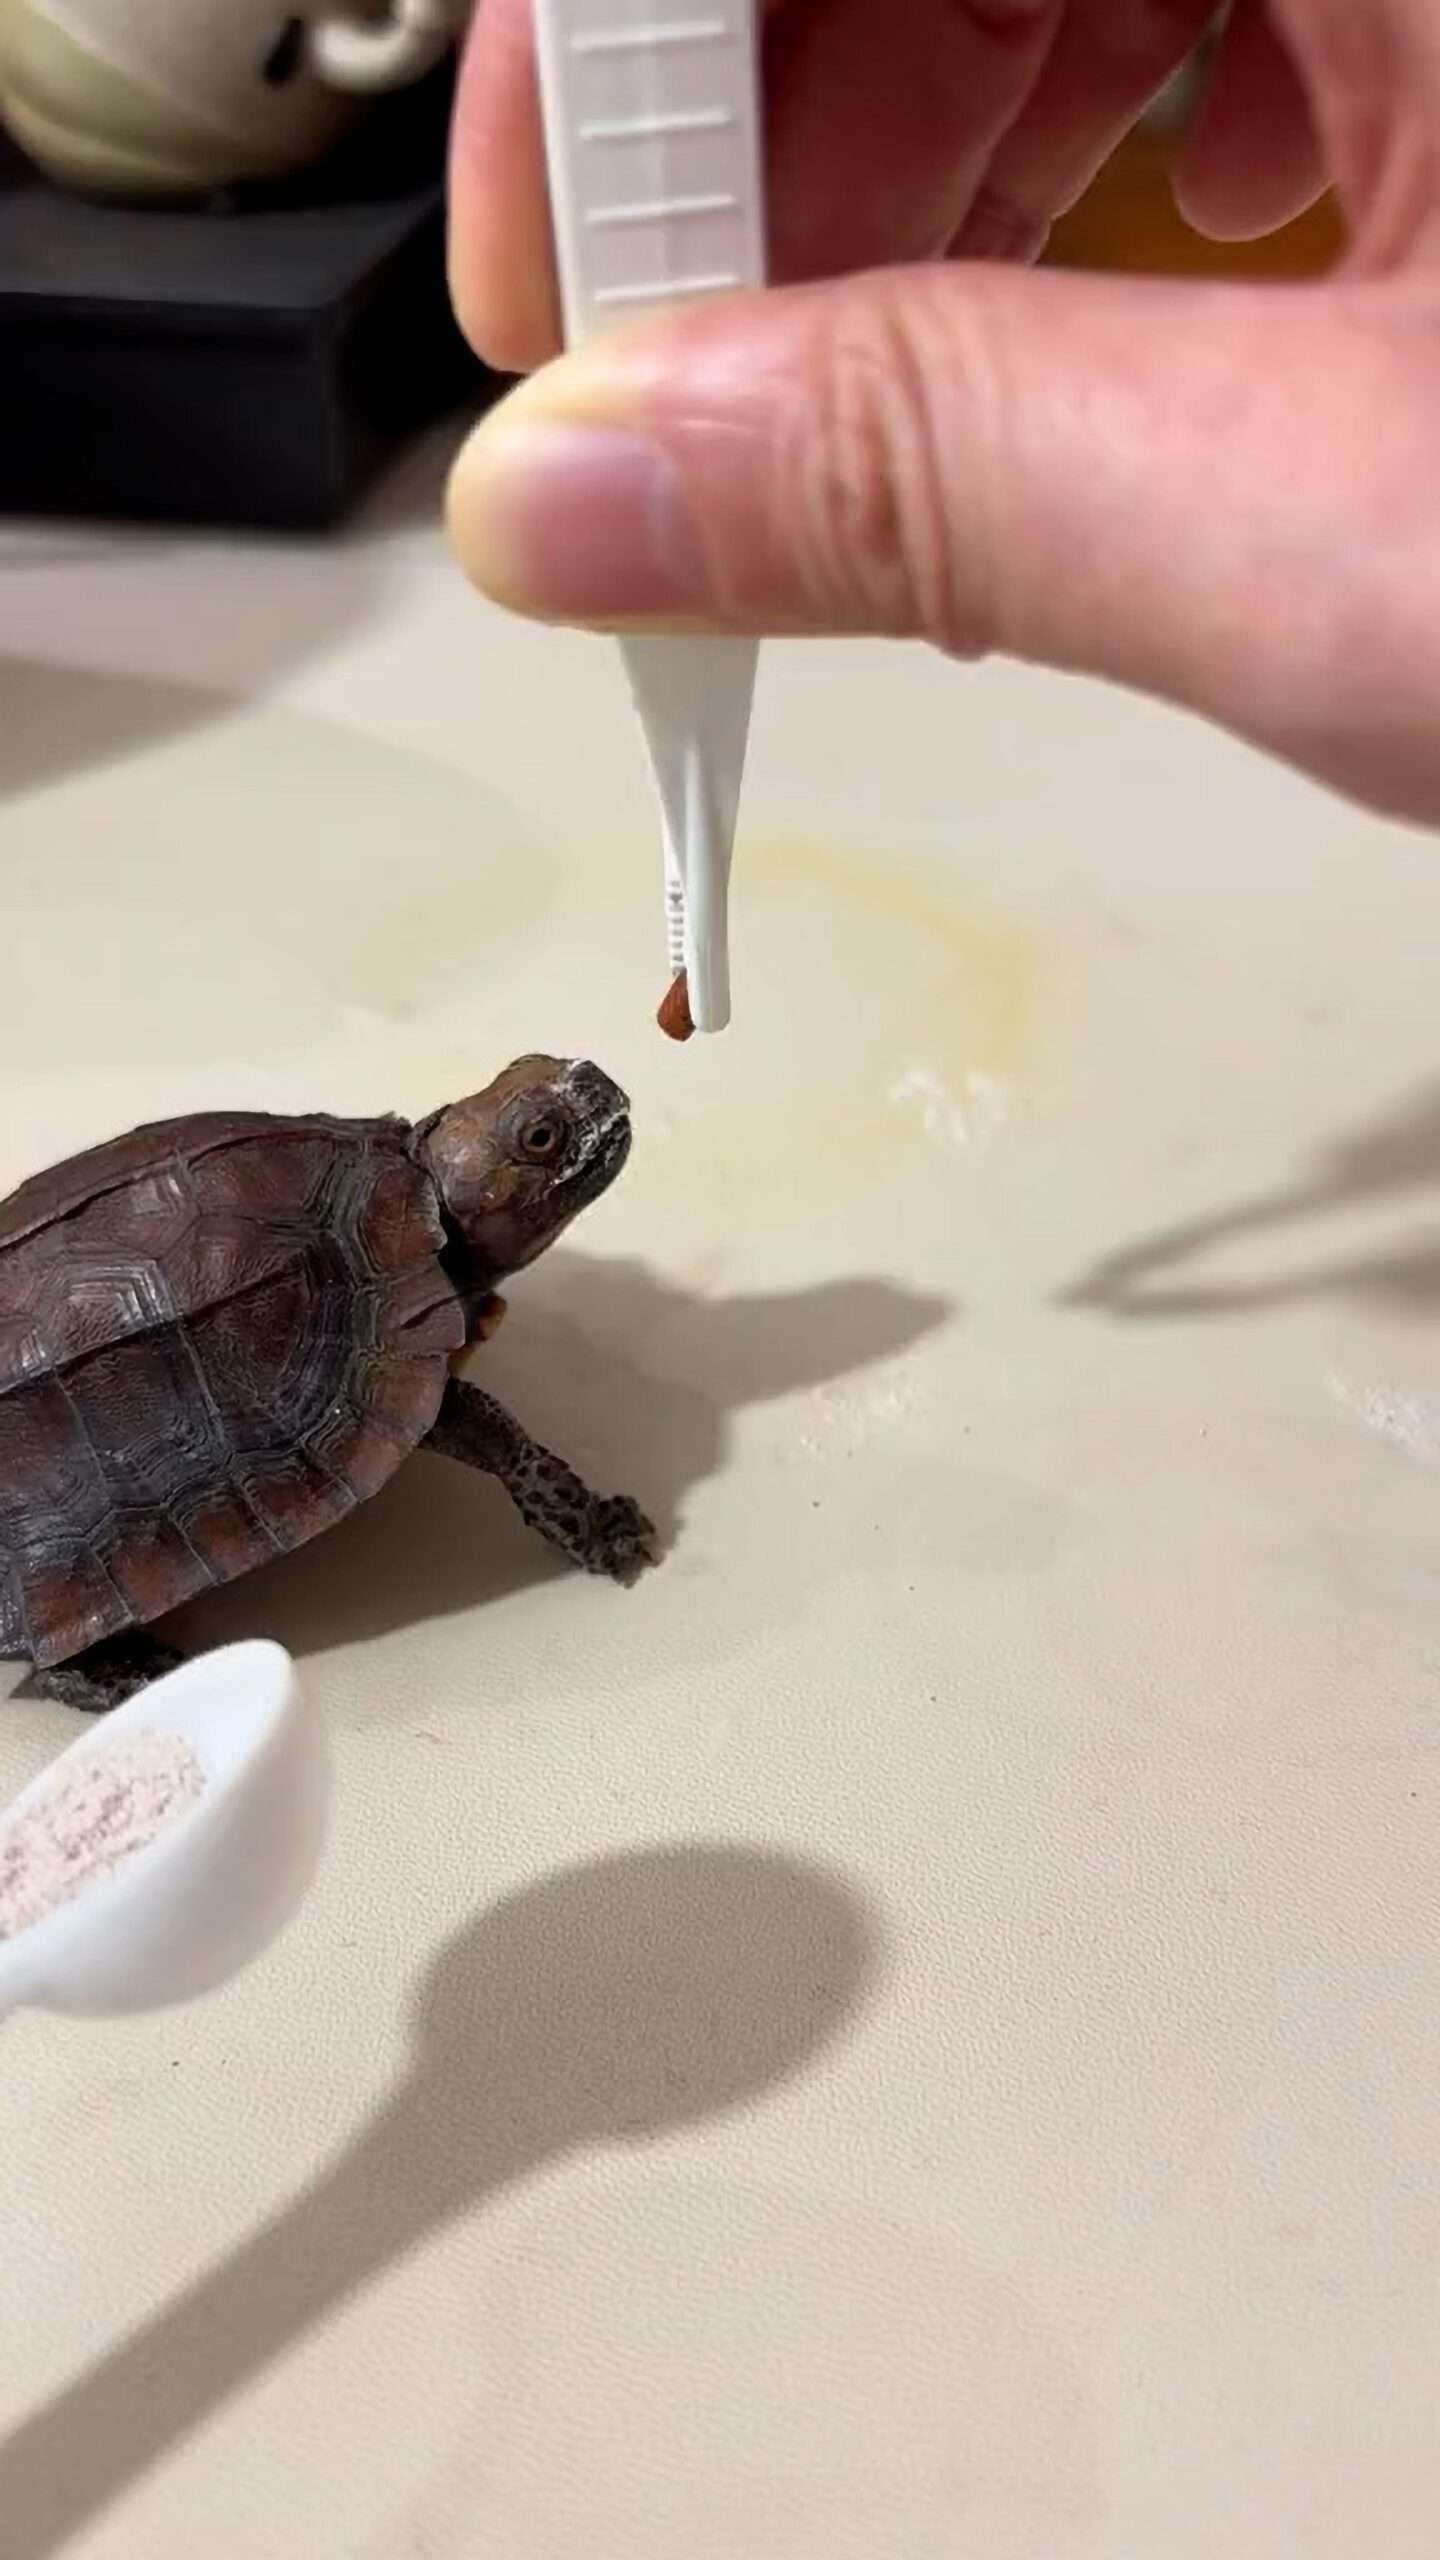 Read more about the article Constipated Turtle Hilariously Tricked Into Taking Nasty-Tasting Medicine